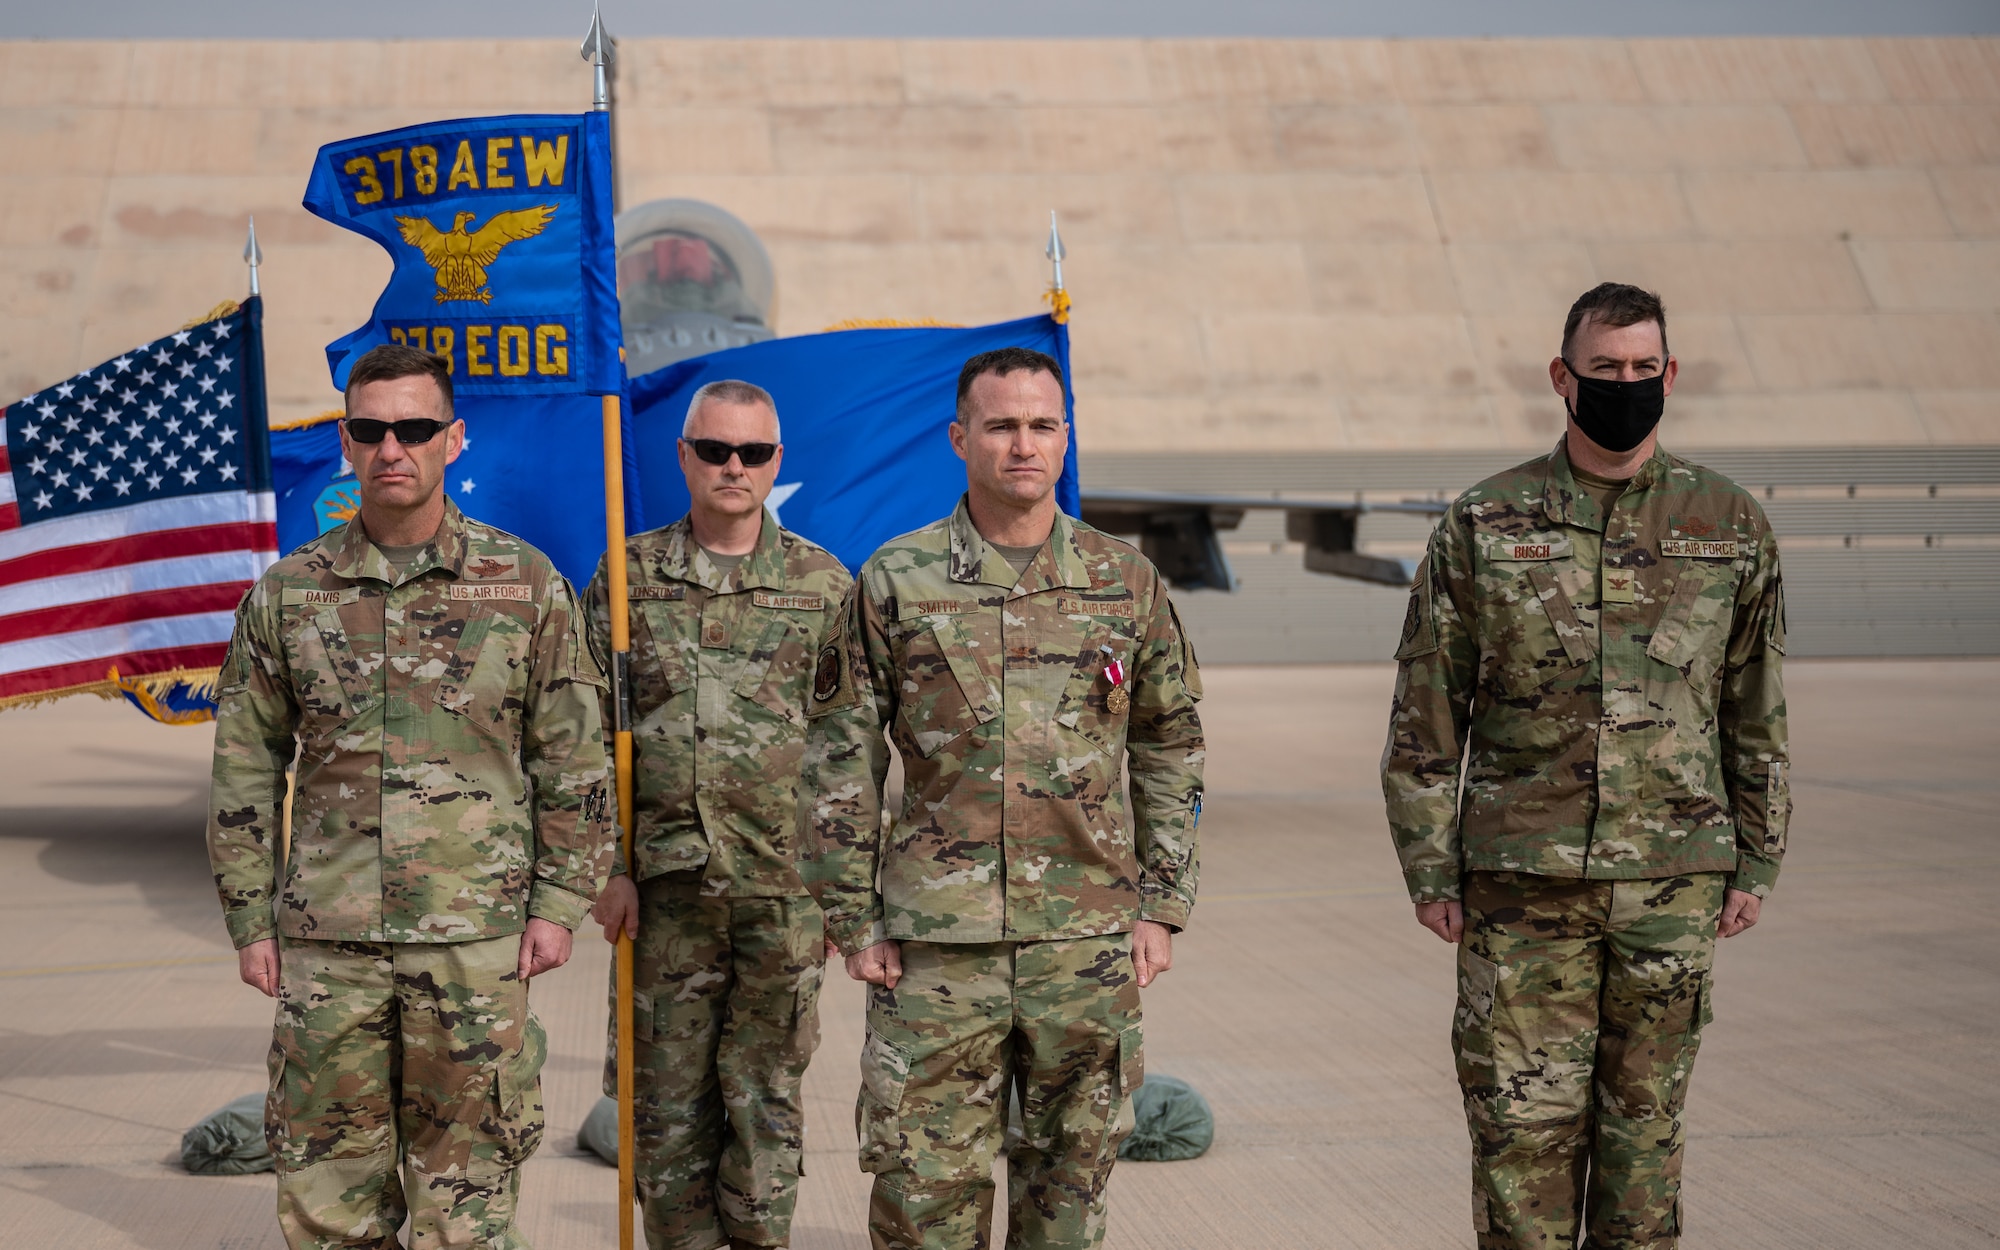 Brig. Gen. Robert D. Davis, 378th Air Expeditionary Wing commander, Col. Jason Smith, outgoing 378th Expeditionary Operations Group commander, and Col. Benjamin Busch, incoming 378th EOG commander, stand at the position of attention during the 378th EOG change of command ceremony at Prince Sultan Air Base, Kingdom of Saudi Arabia, Dec. 26, 2021. A change of command is a military tradition that represents a formal transfer of authority and responsibility for a unit from one commanding or flag officer to another. (U.S. Air Force photo by Staff Sgt. Christina Graves)